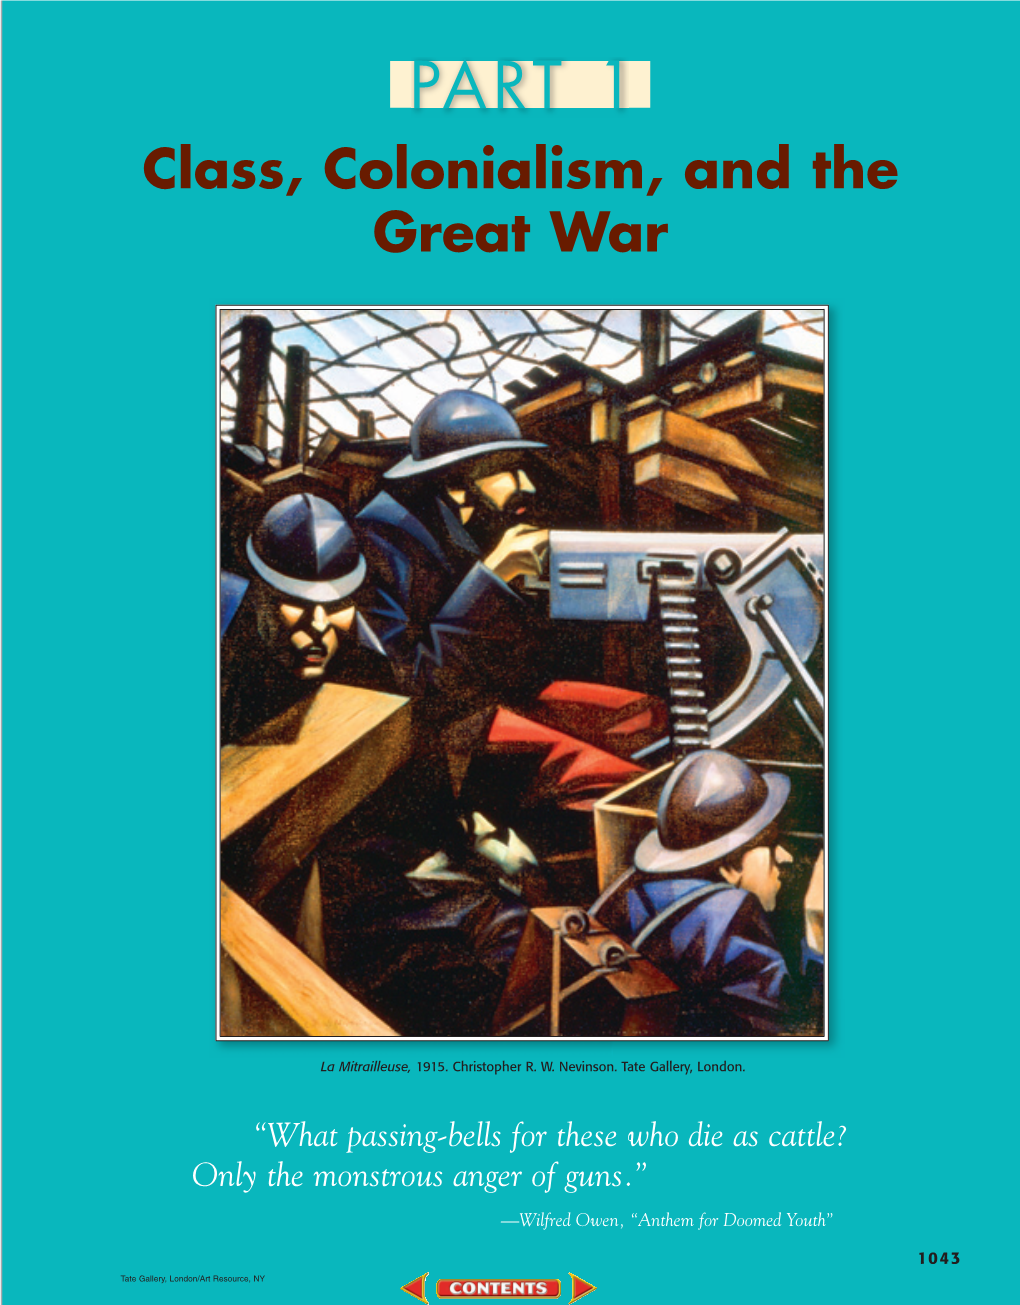 PART 1 Class, Colonialism, and the Great War